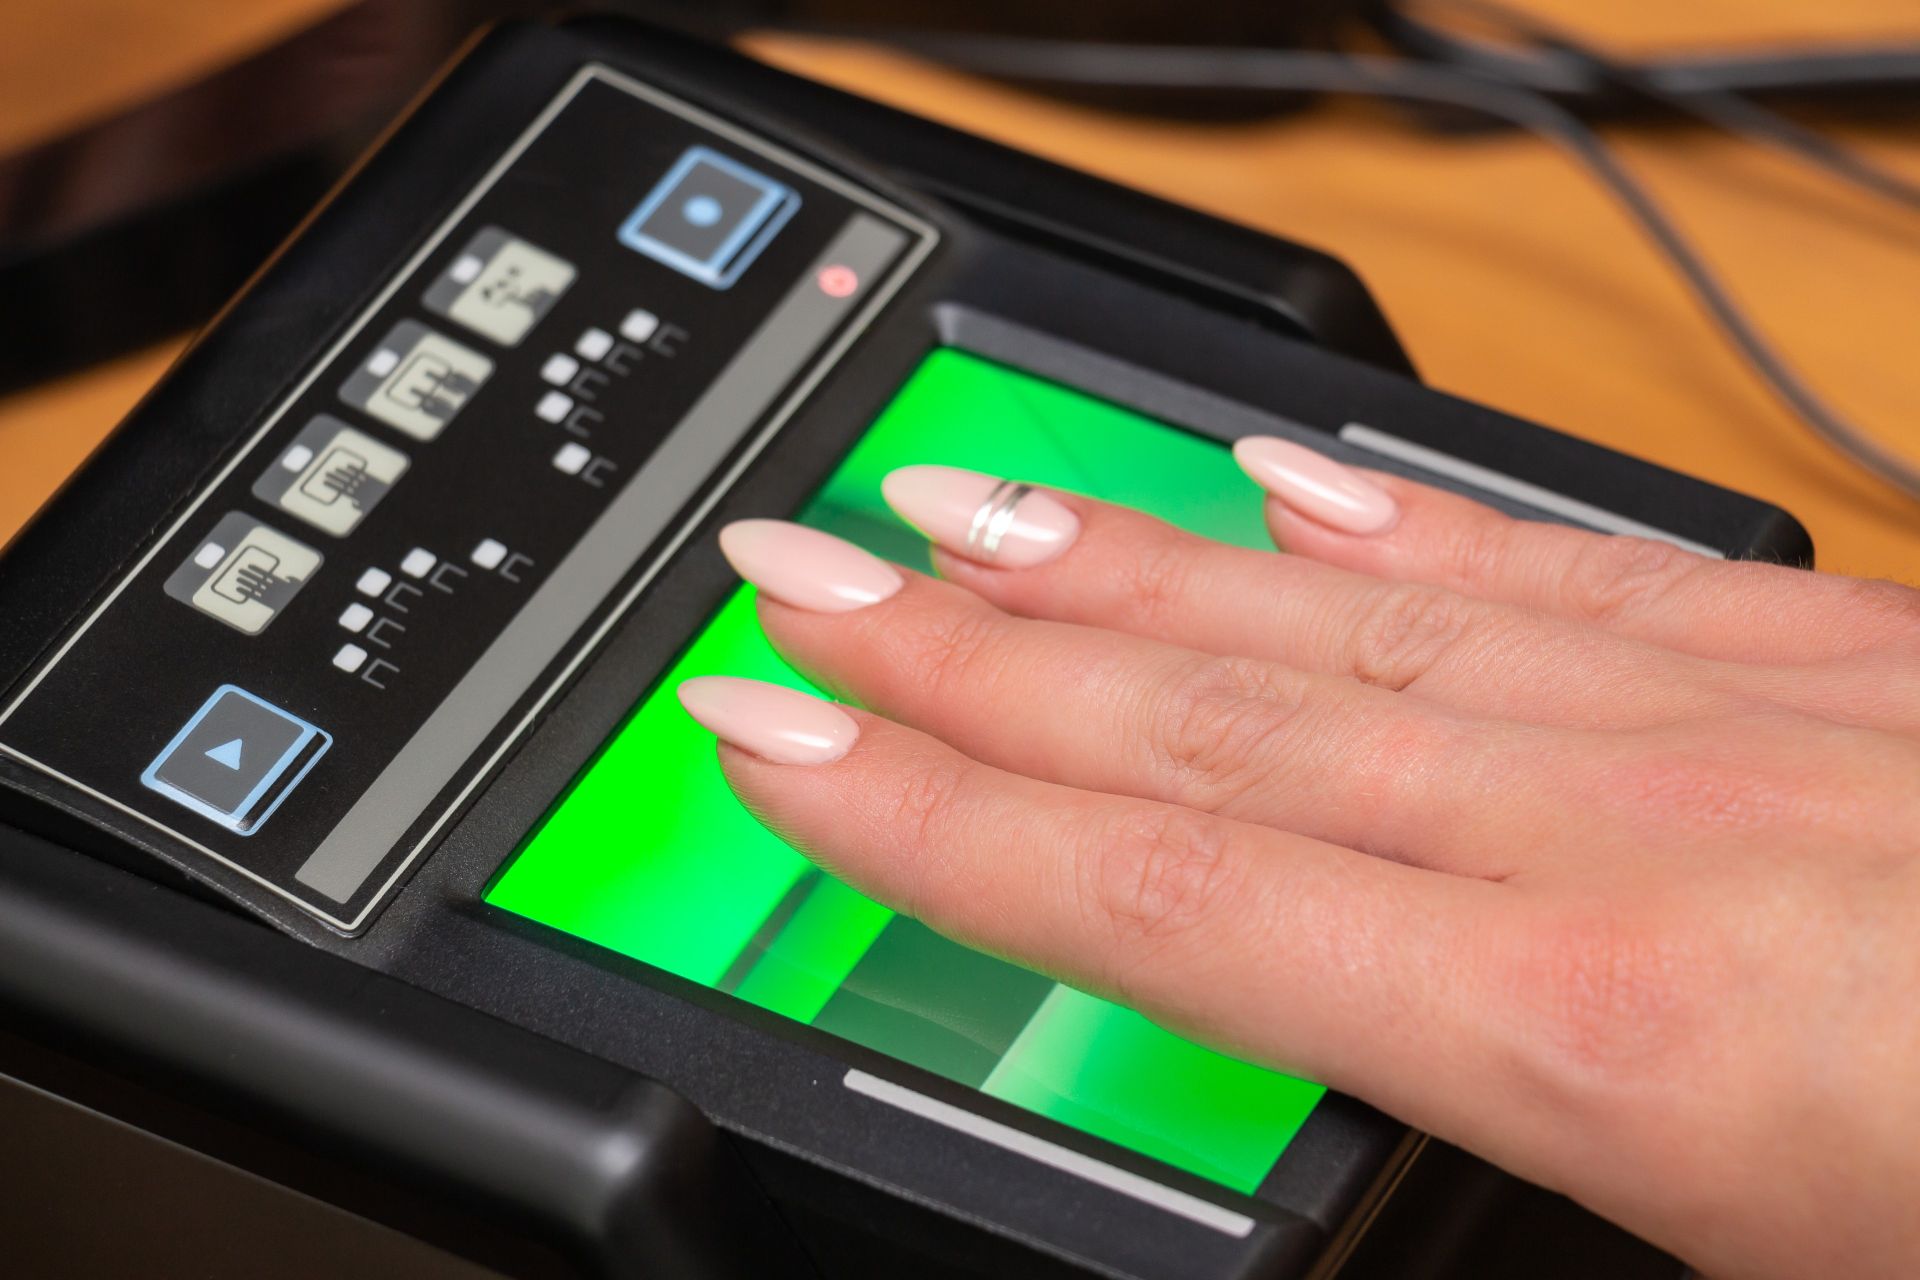 Women's hand with fake nails getting finger's scanned on a fingerprinting device.